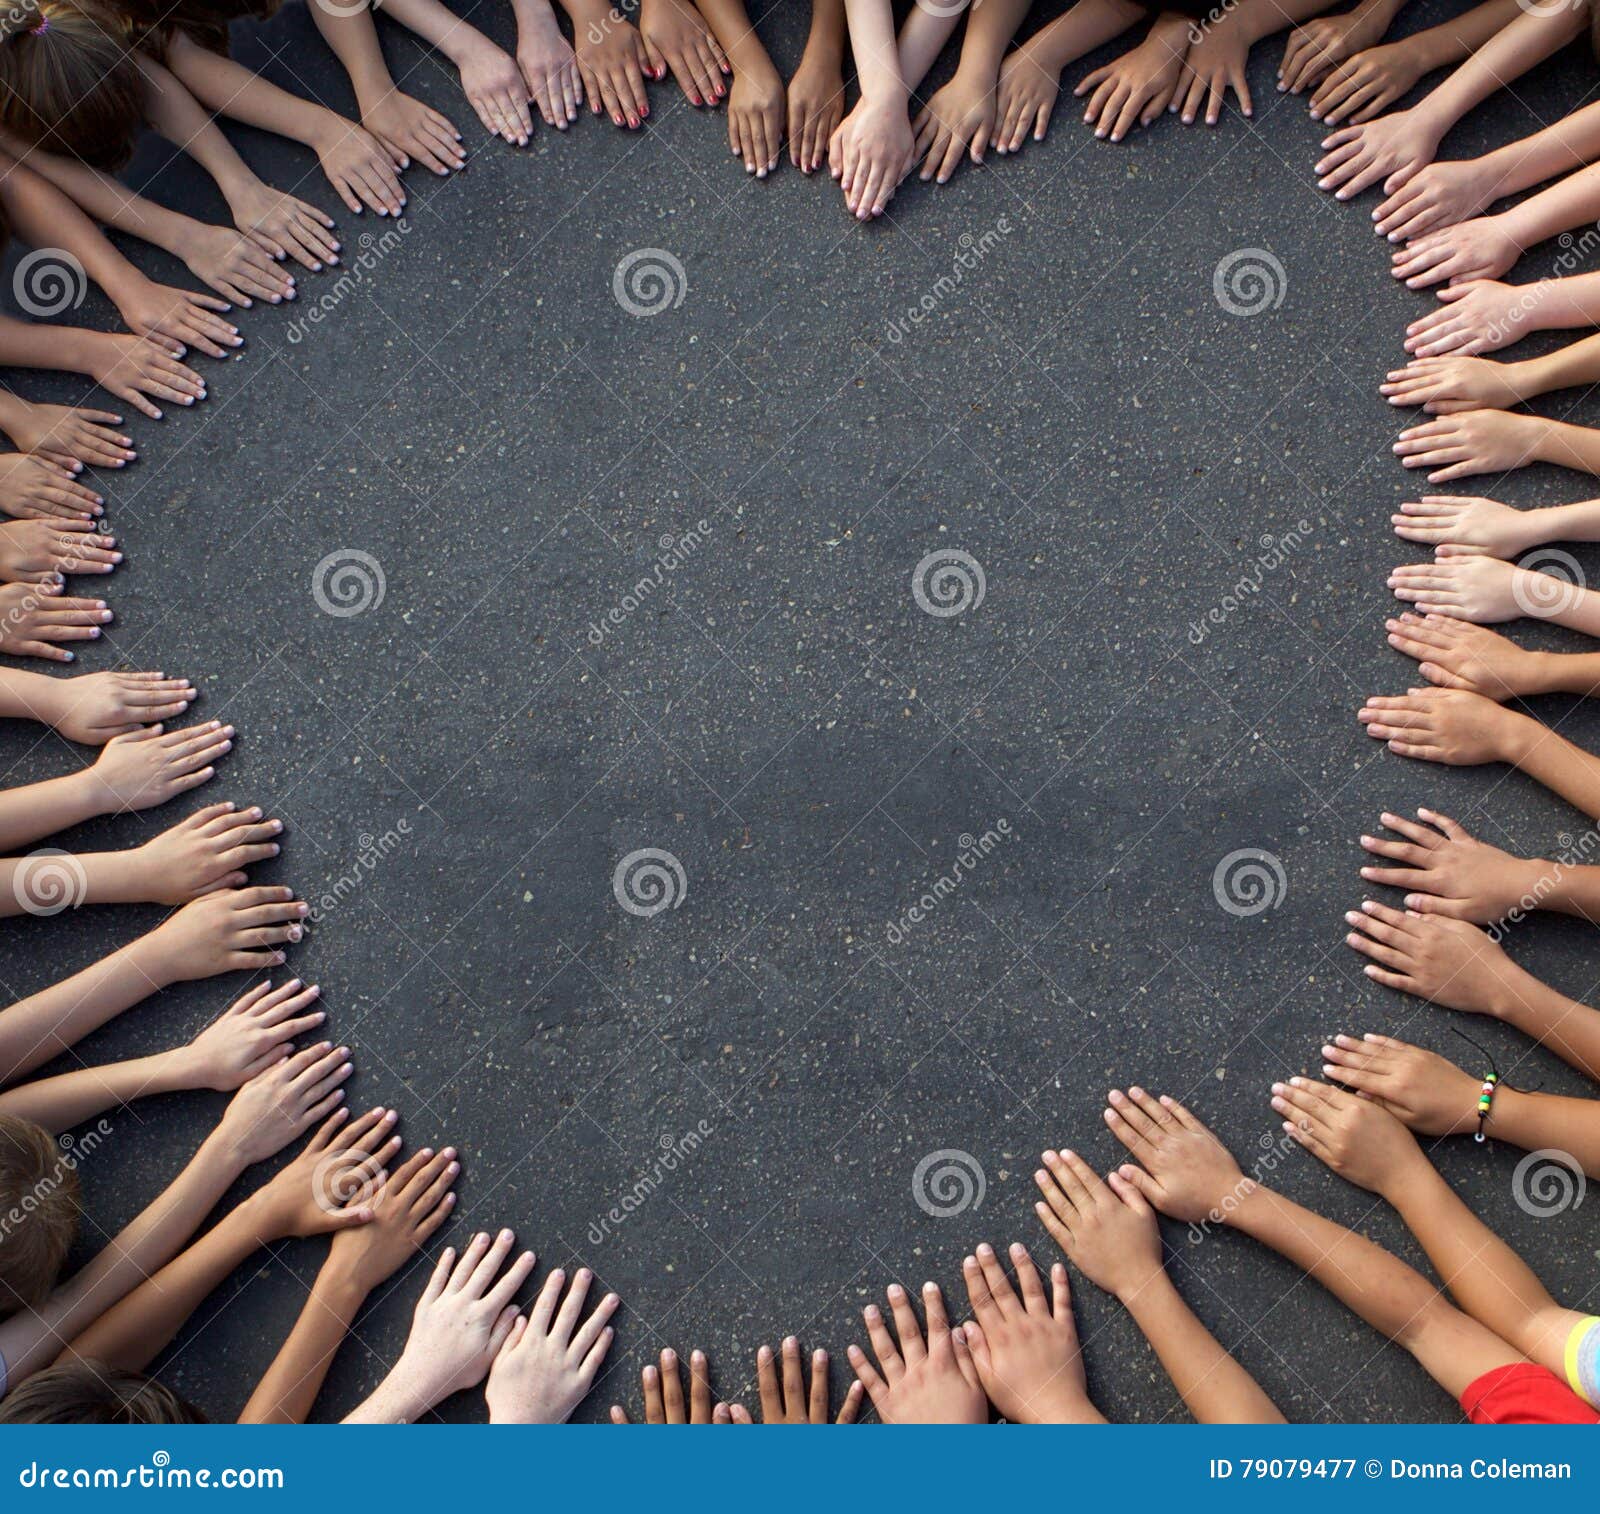 large group of children's hand forming a heart 